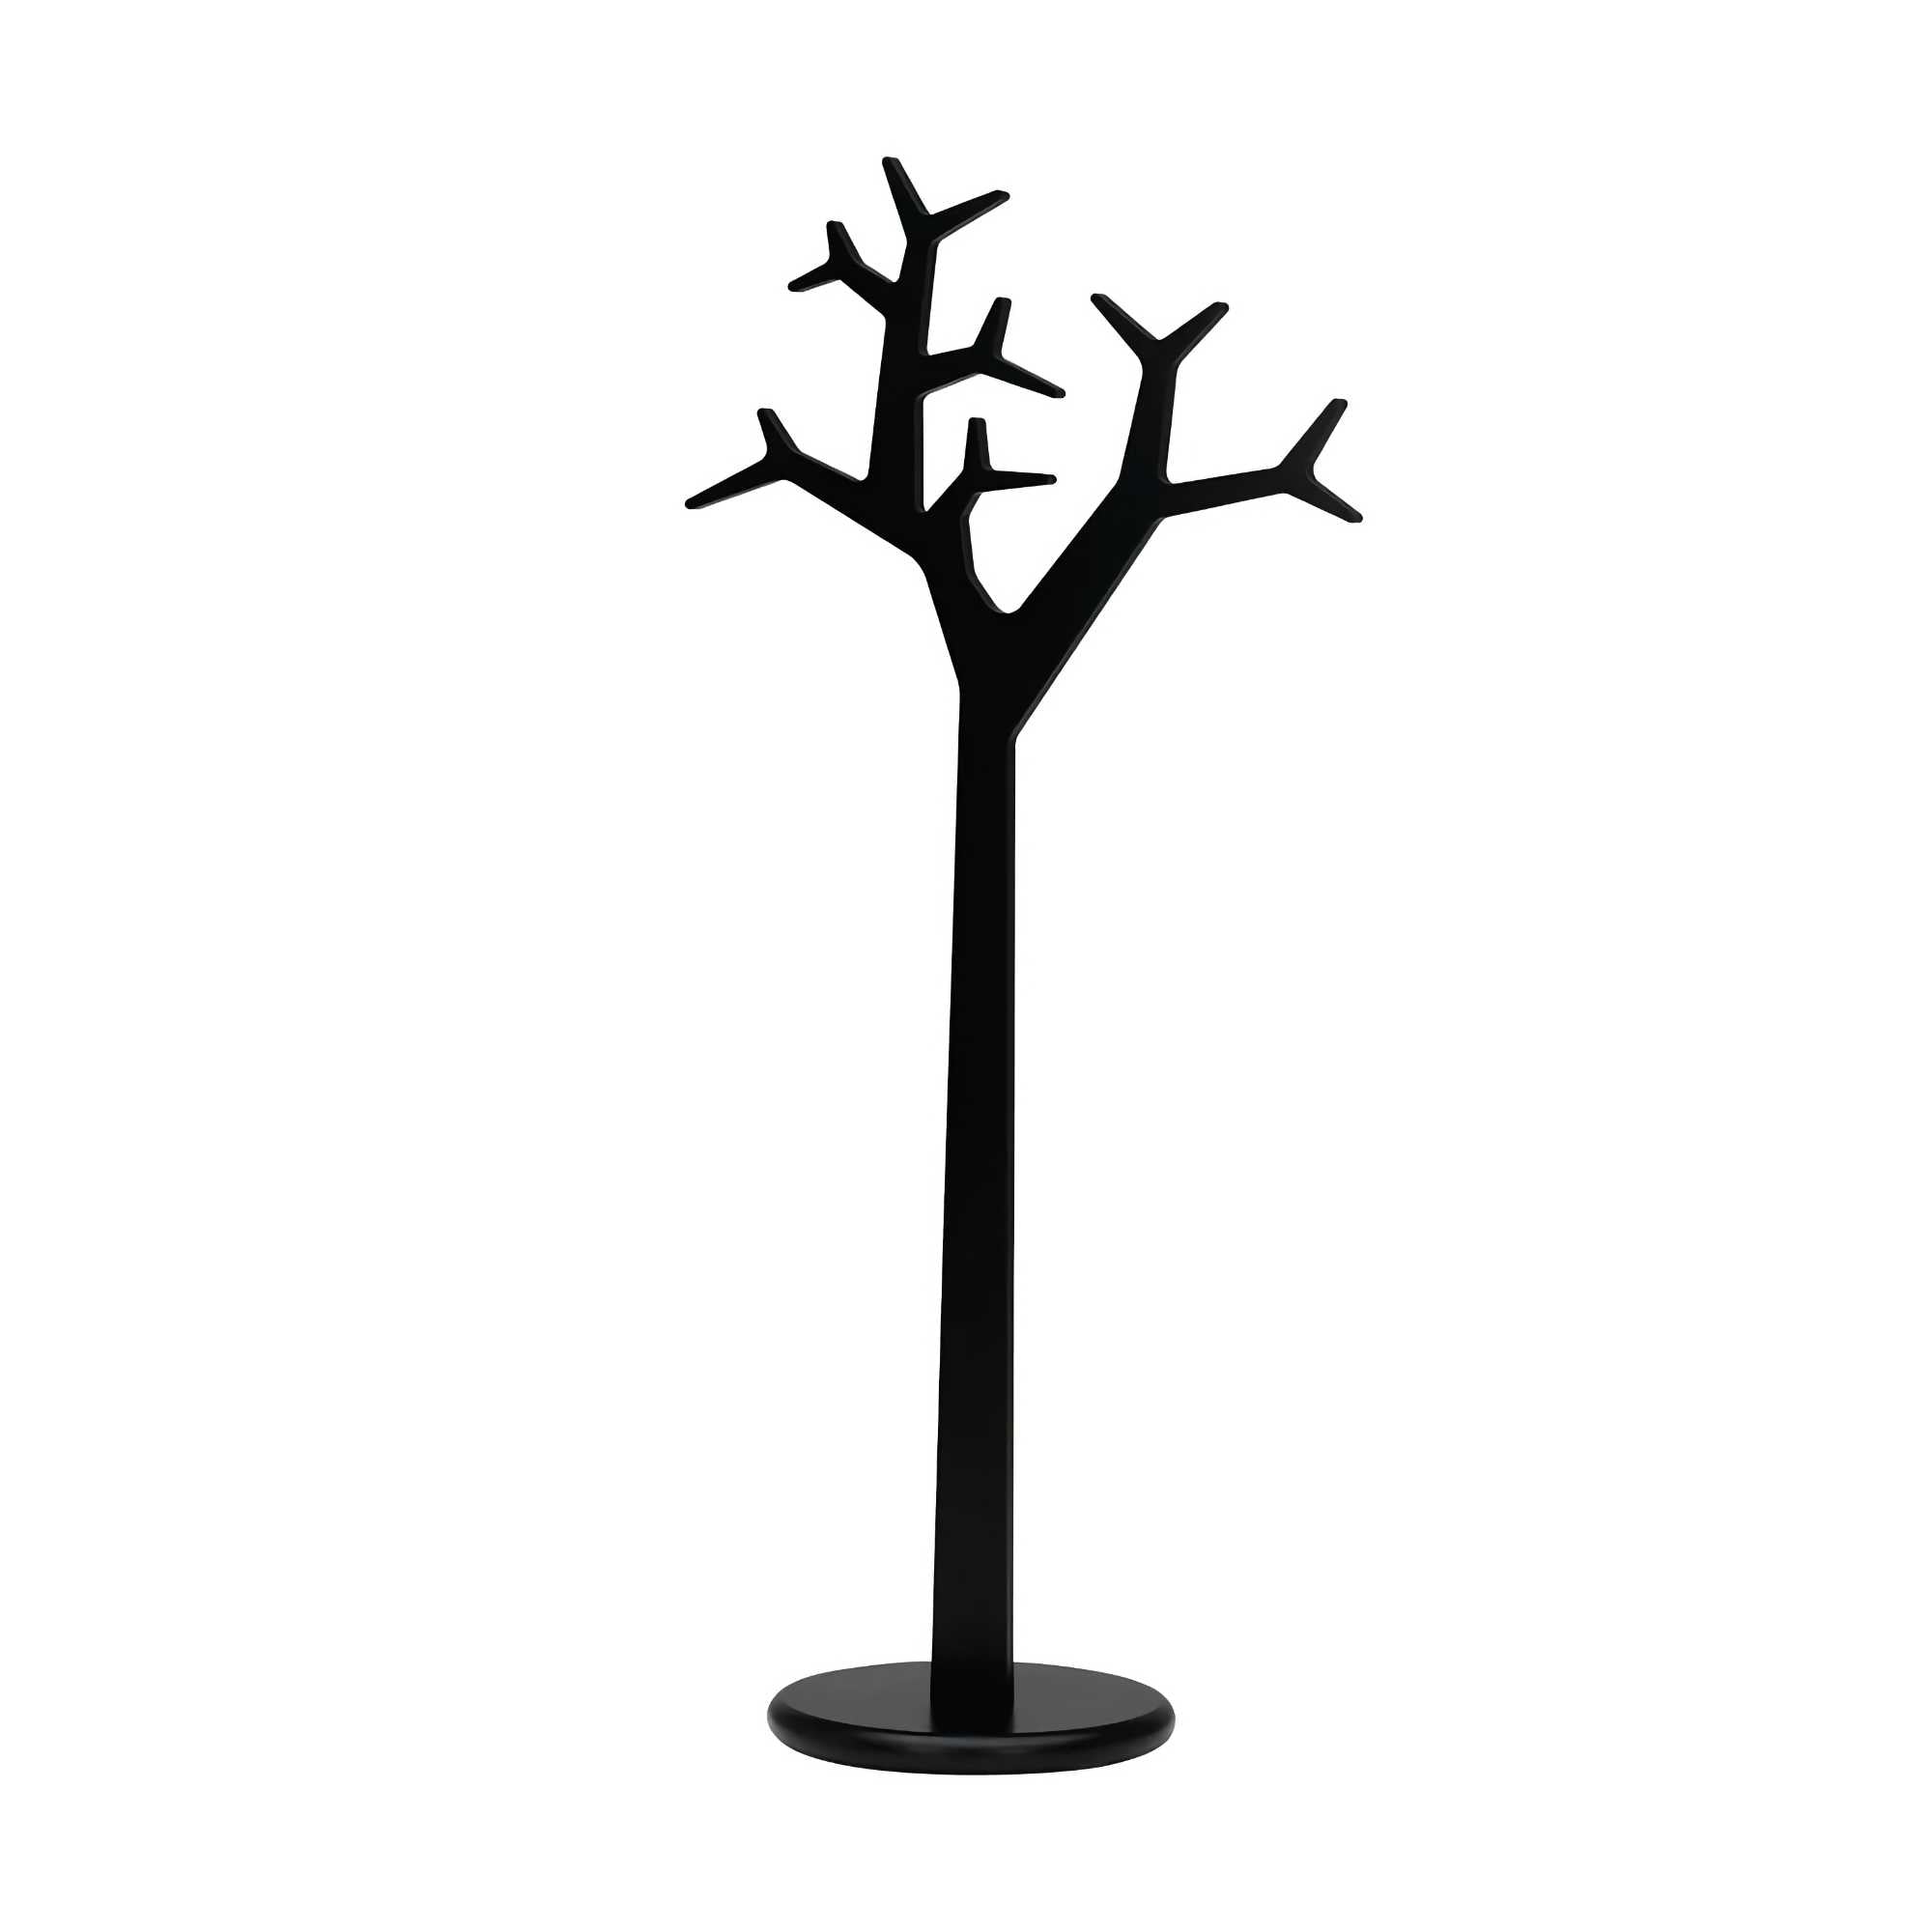 Swedese Tree coat stand(194 cm), black